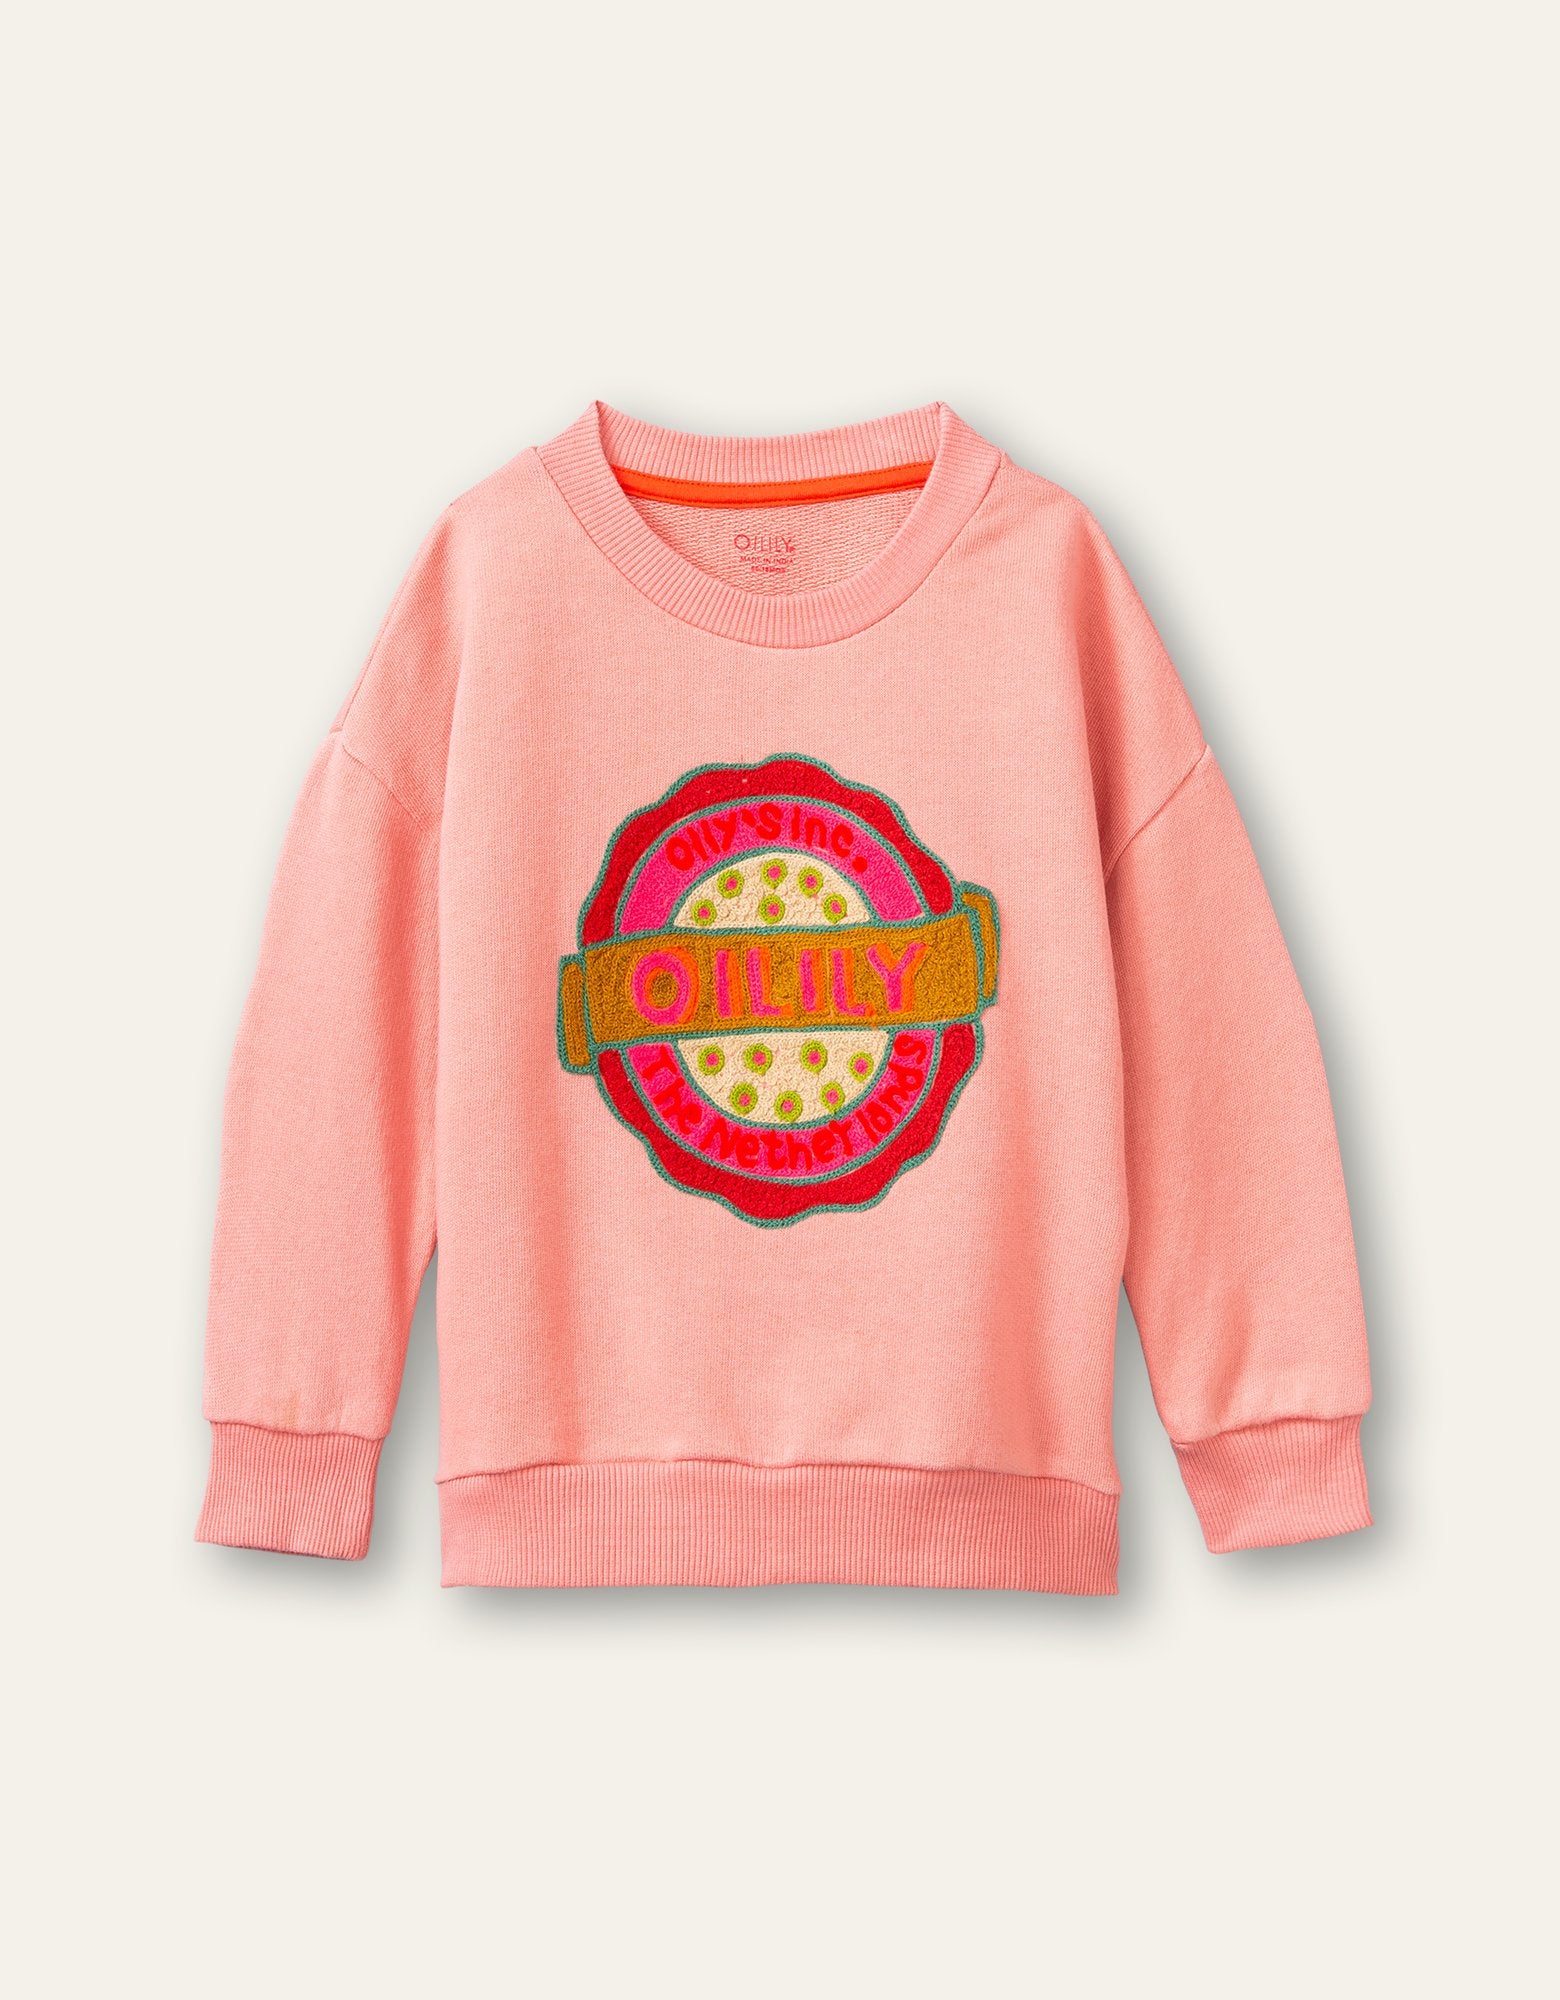 Oilily Heritage Sweater 33 with artwork